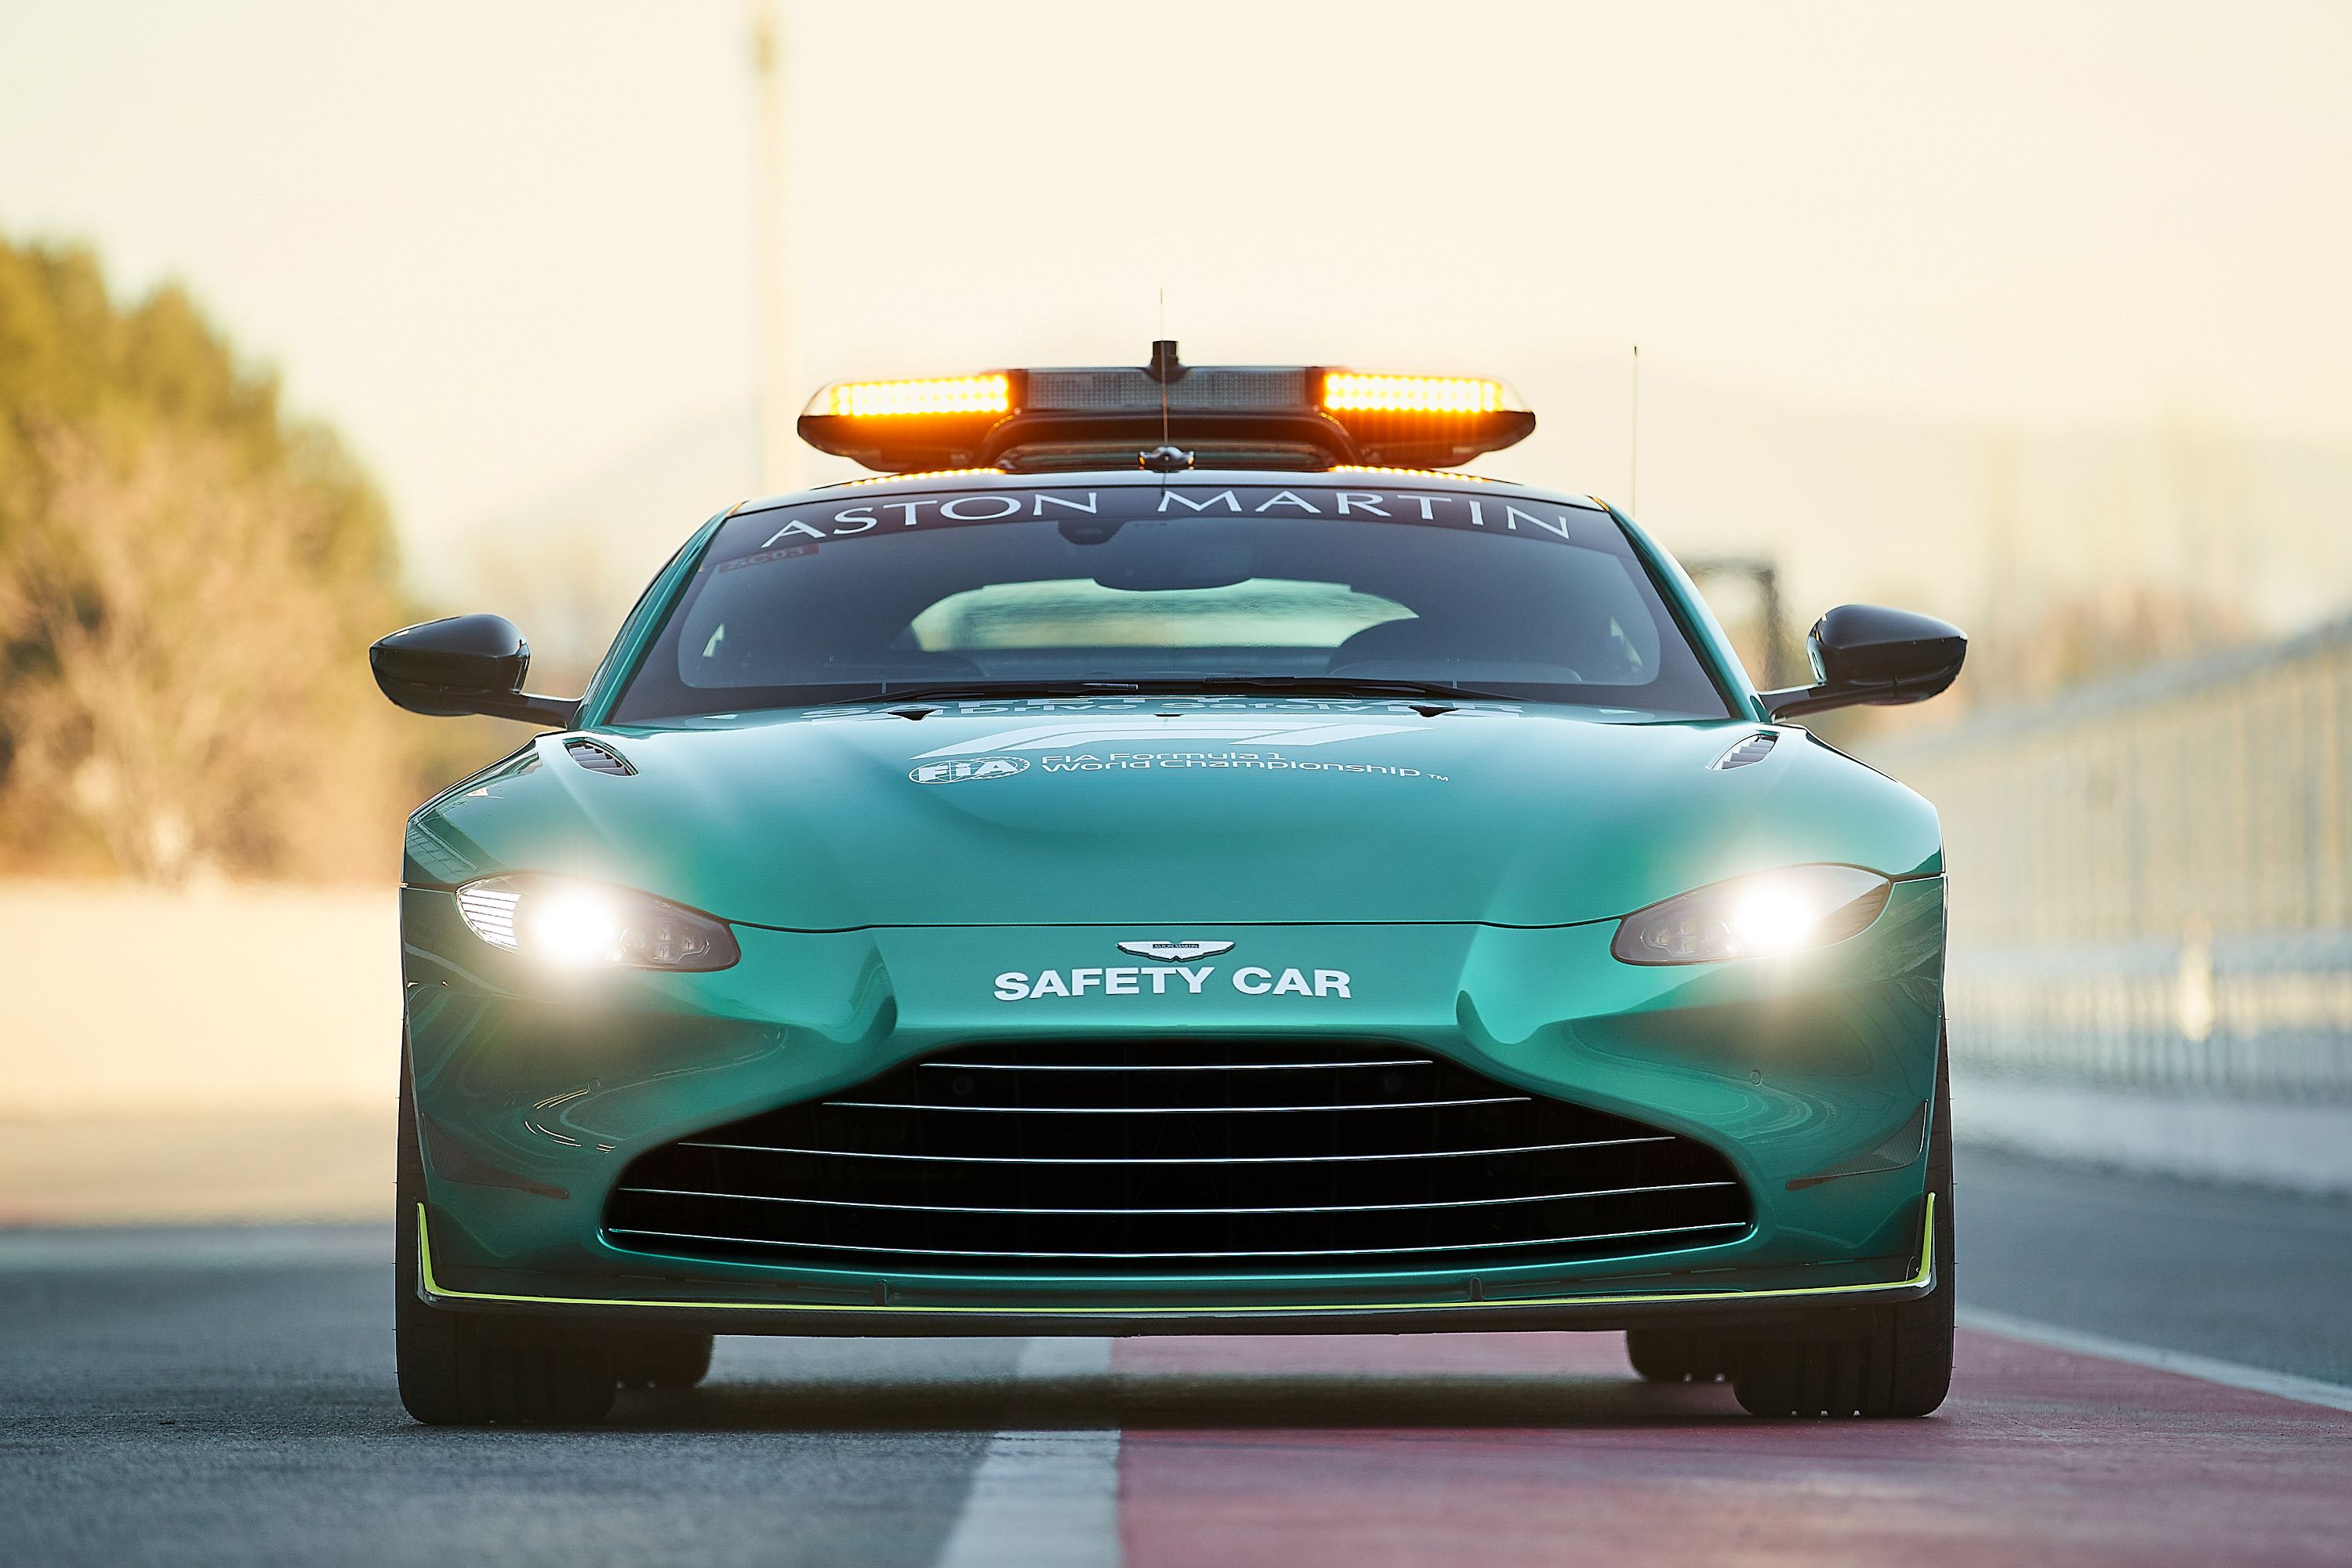 Aston Martin Vantage becomes official safety car of 2022 Formula One